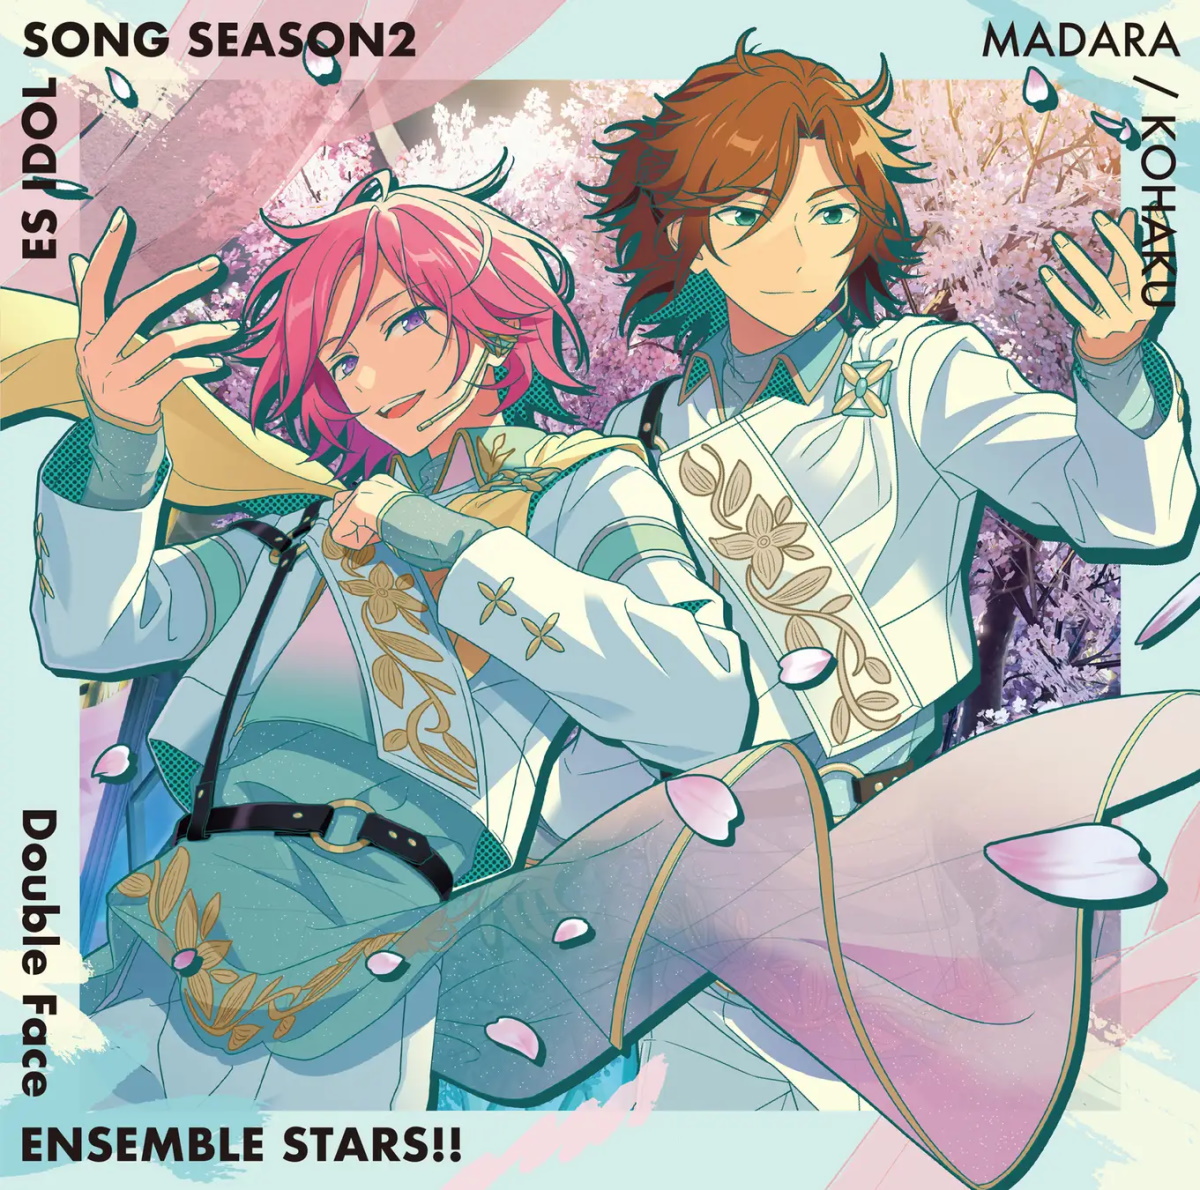 Cover for『MaM - Hands Craft』from the release『Ensemble Stars!! ES Idol Song season2 No name yet』